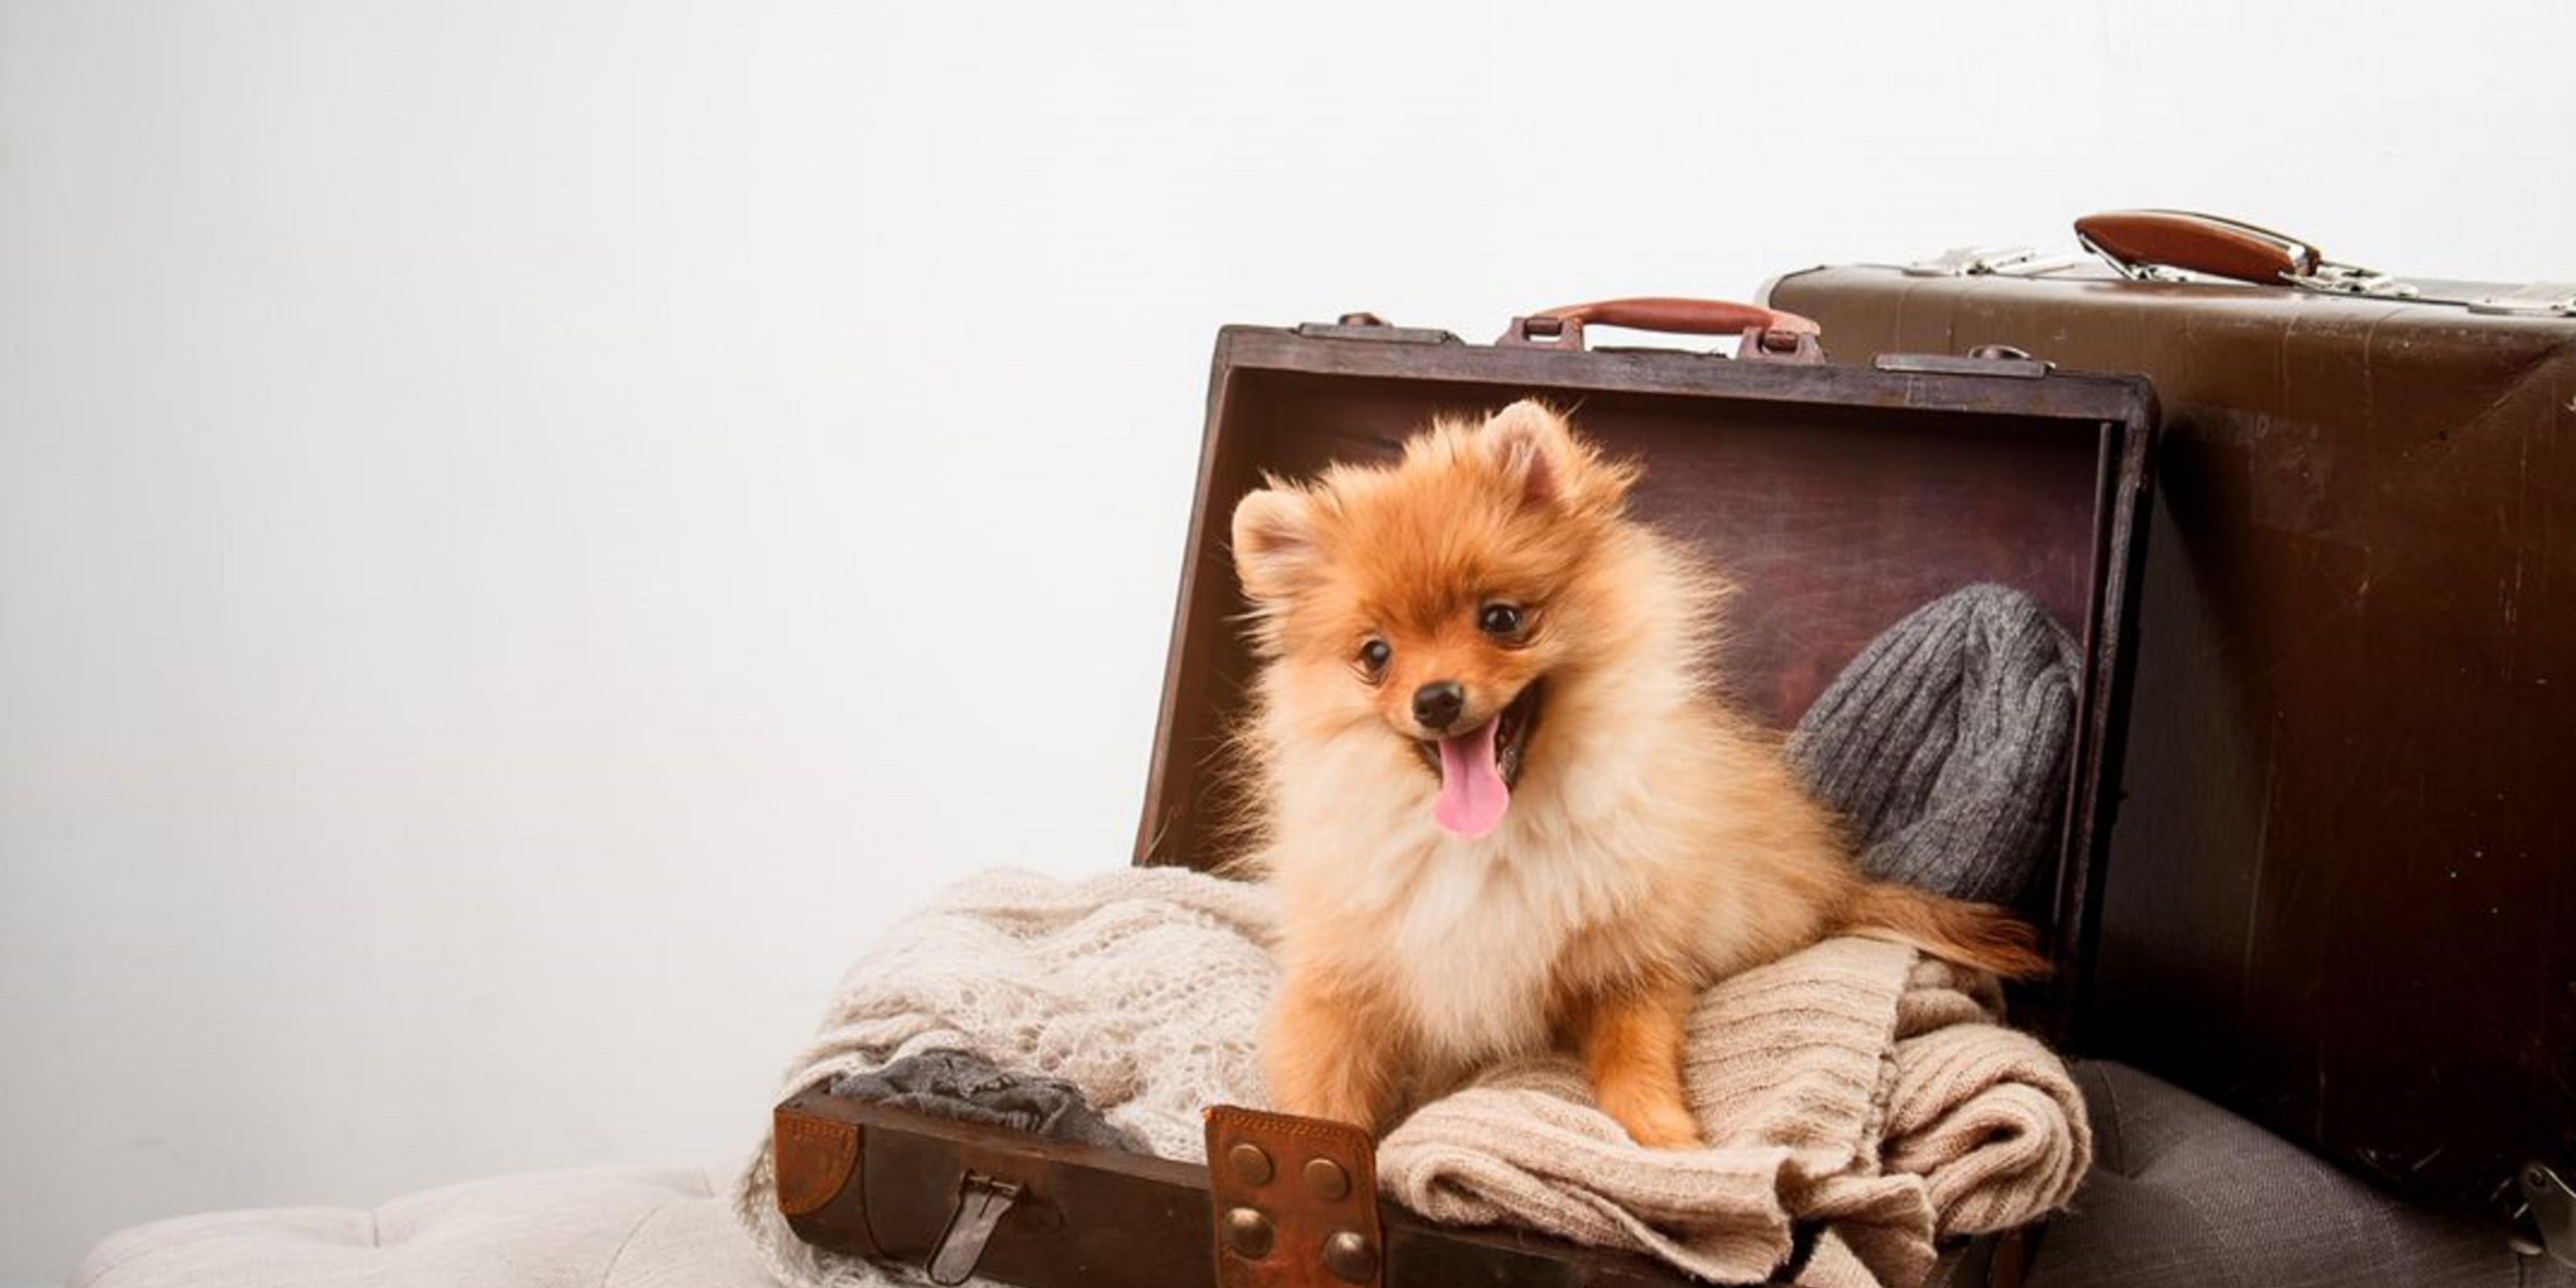 We're a very pet friendly hotel and we've got a host of pet perfect rooms for your four legged family member. An extra cleaning charge of GBP20 per night applies. Dog treats are offered on arrival. Located less than a mile from Eurotunnel, we are the best stop for those travelling to the continent with their pet pooch.  